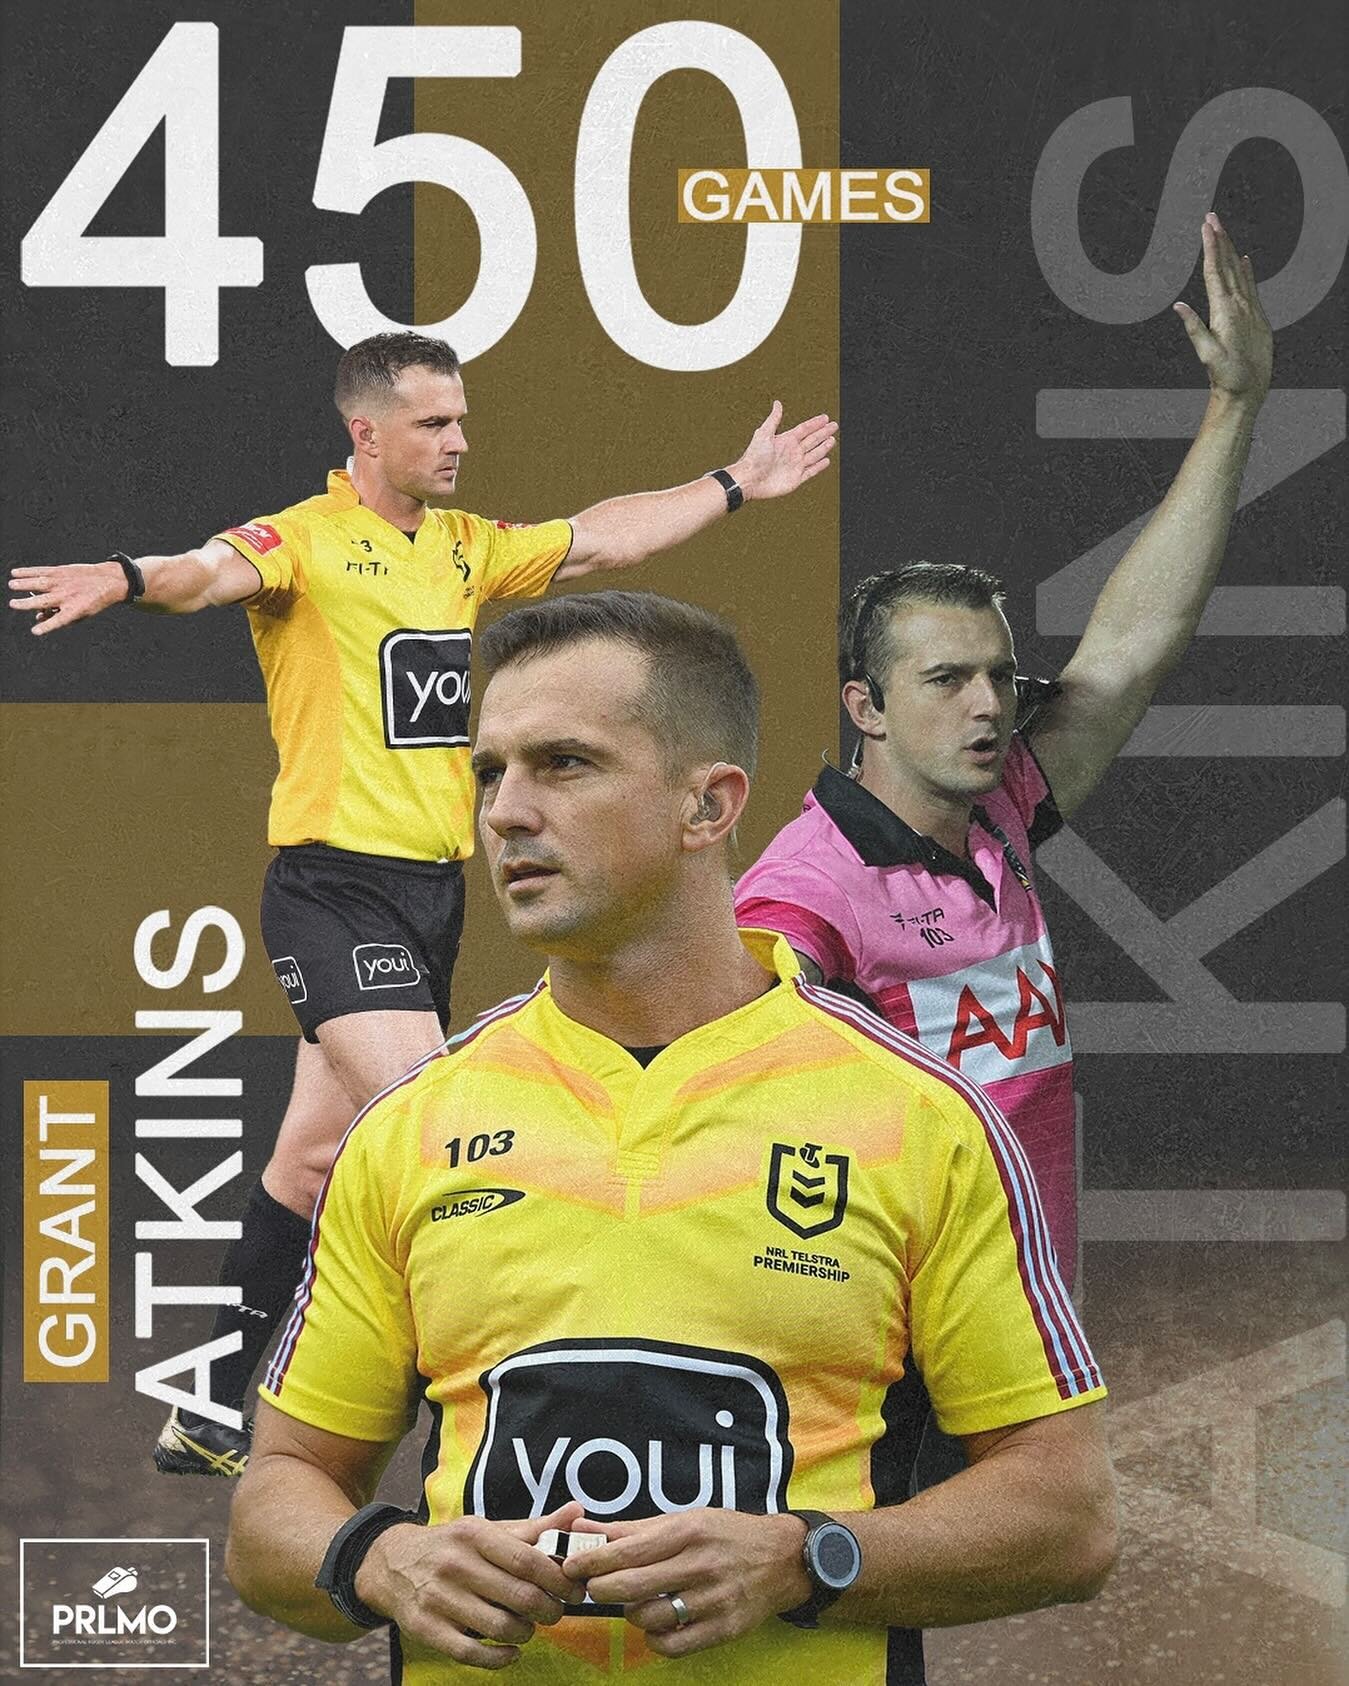 Congratulations to Grant Atkins who will officiate in NRL game 4️⃣5️⃣0️⃣ of his career today, when he referees the Bulldogs v Roosters match at Accor Stadium 🙌

Grant&rsquo;s stellar career thus far has included 102 games as a Touch Judge, 86 games 